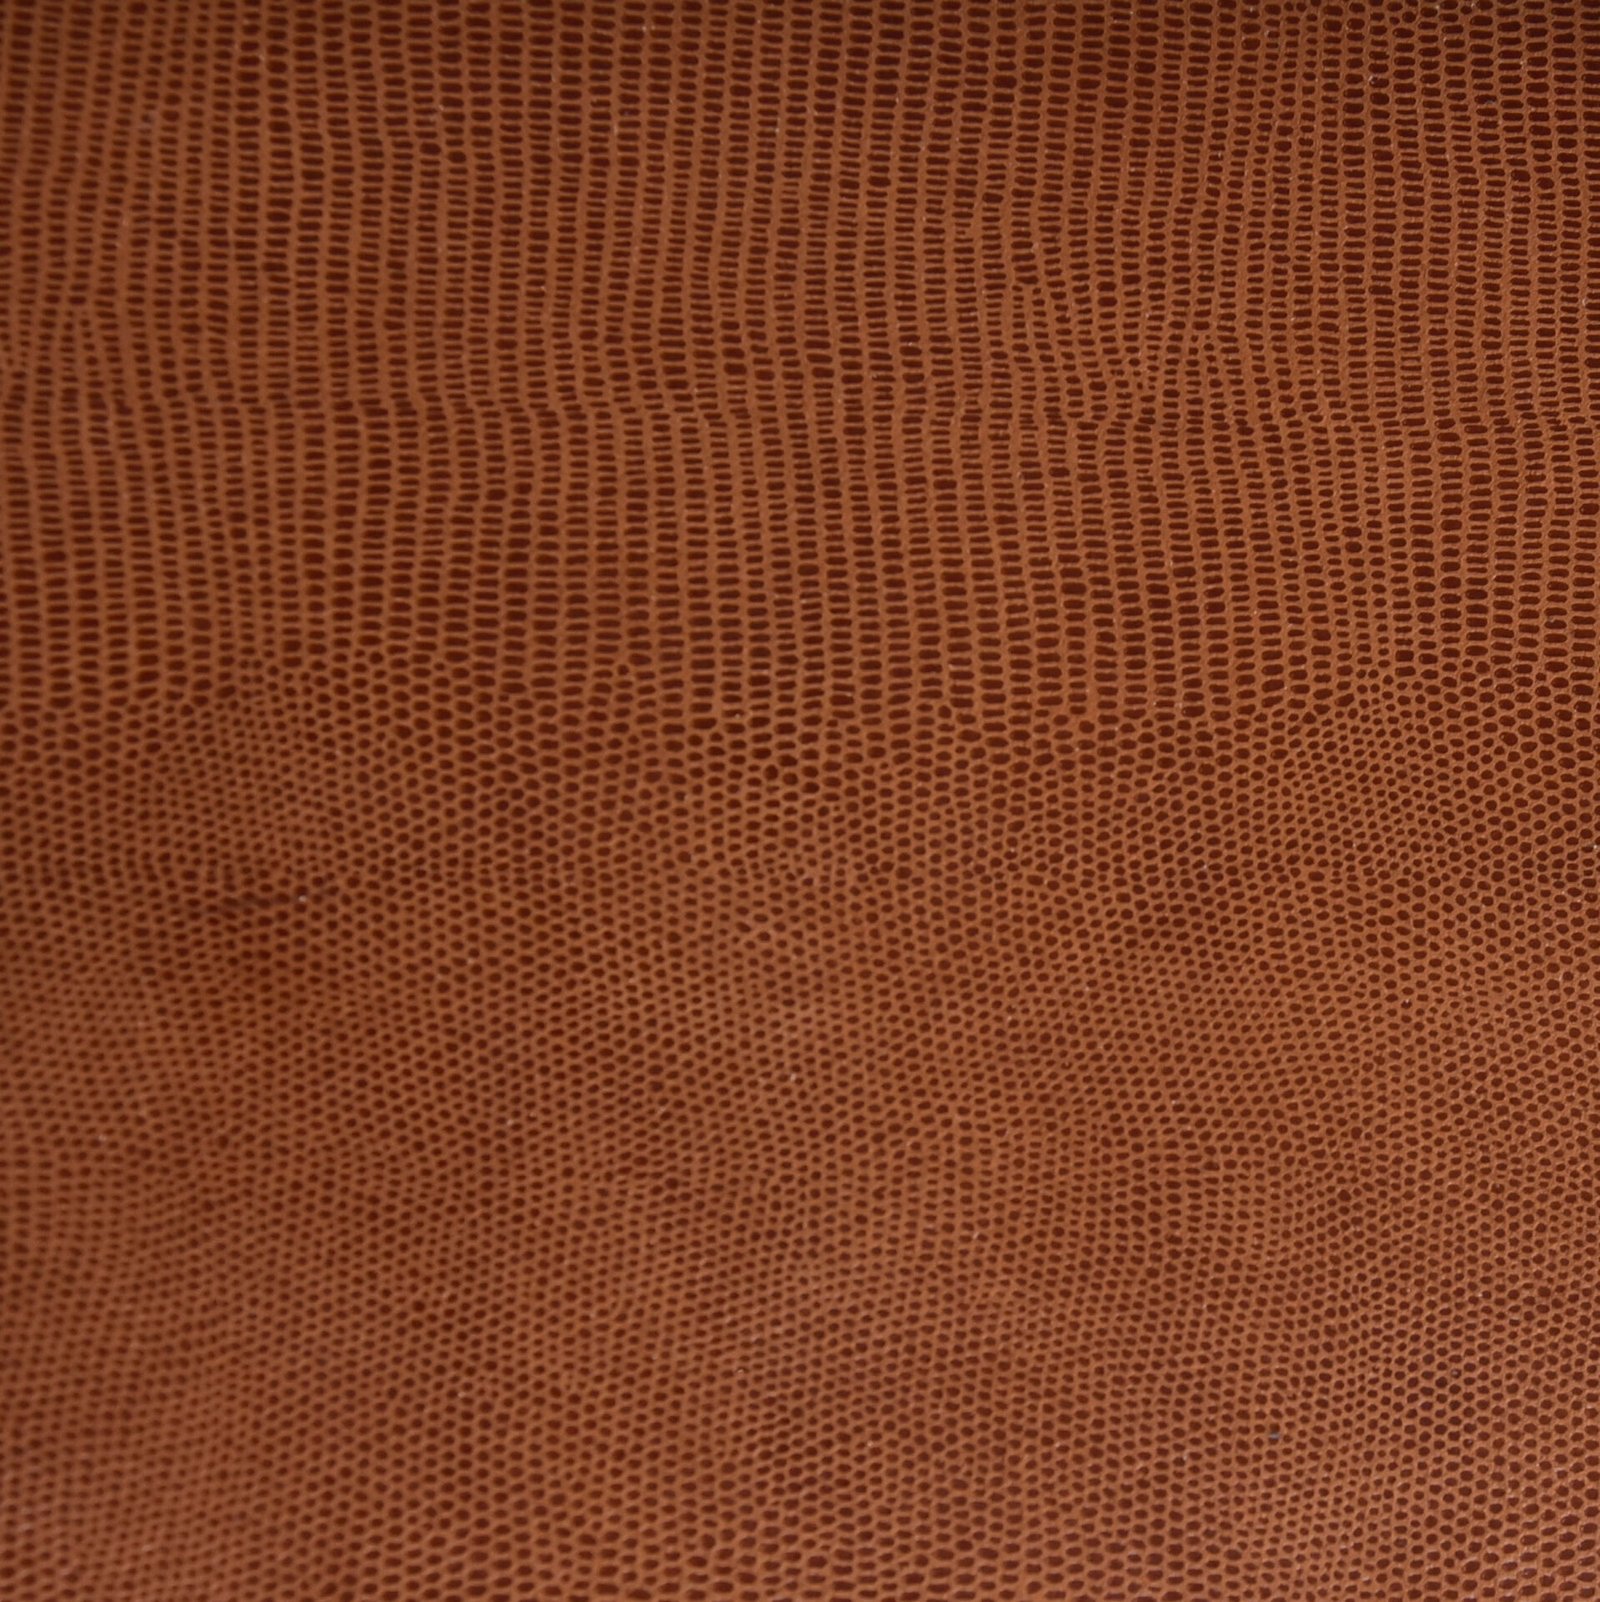 Medium Brown leather for shoes